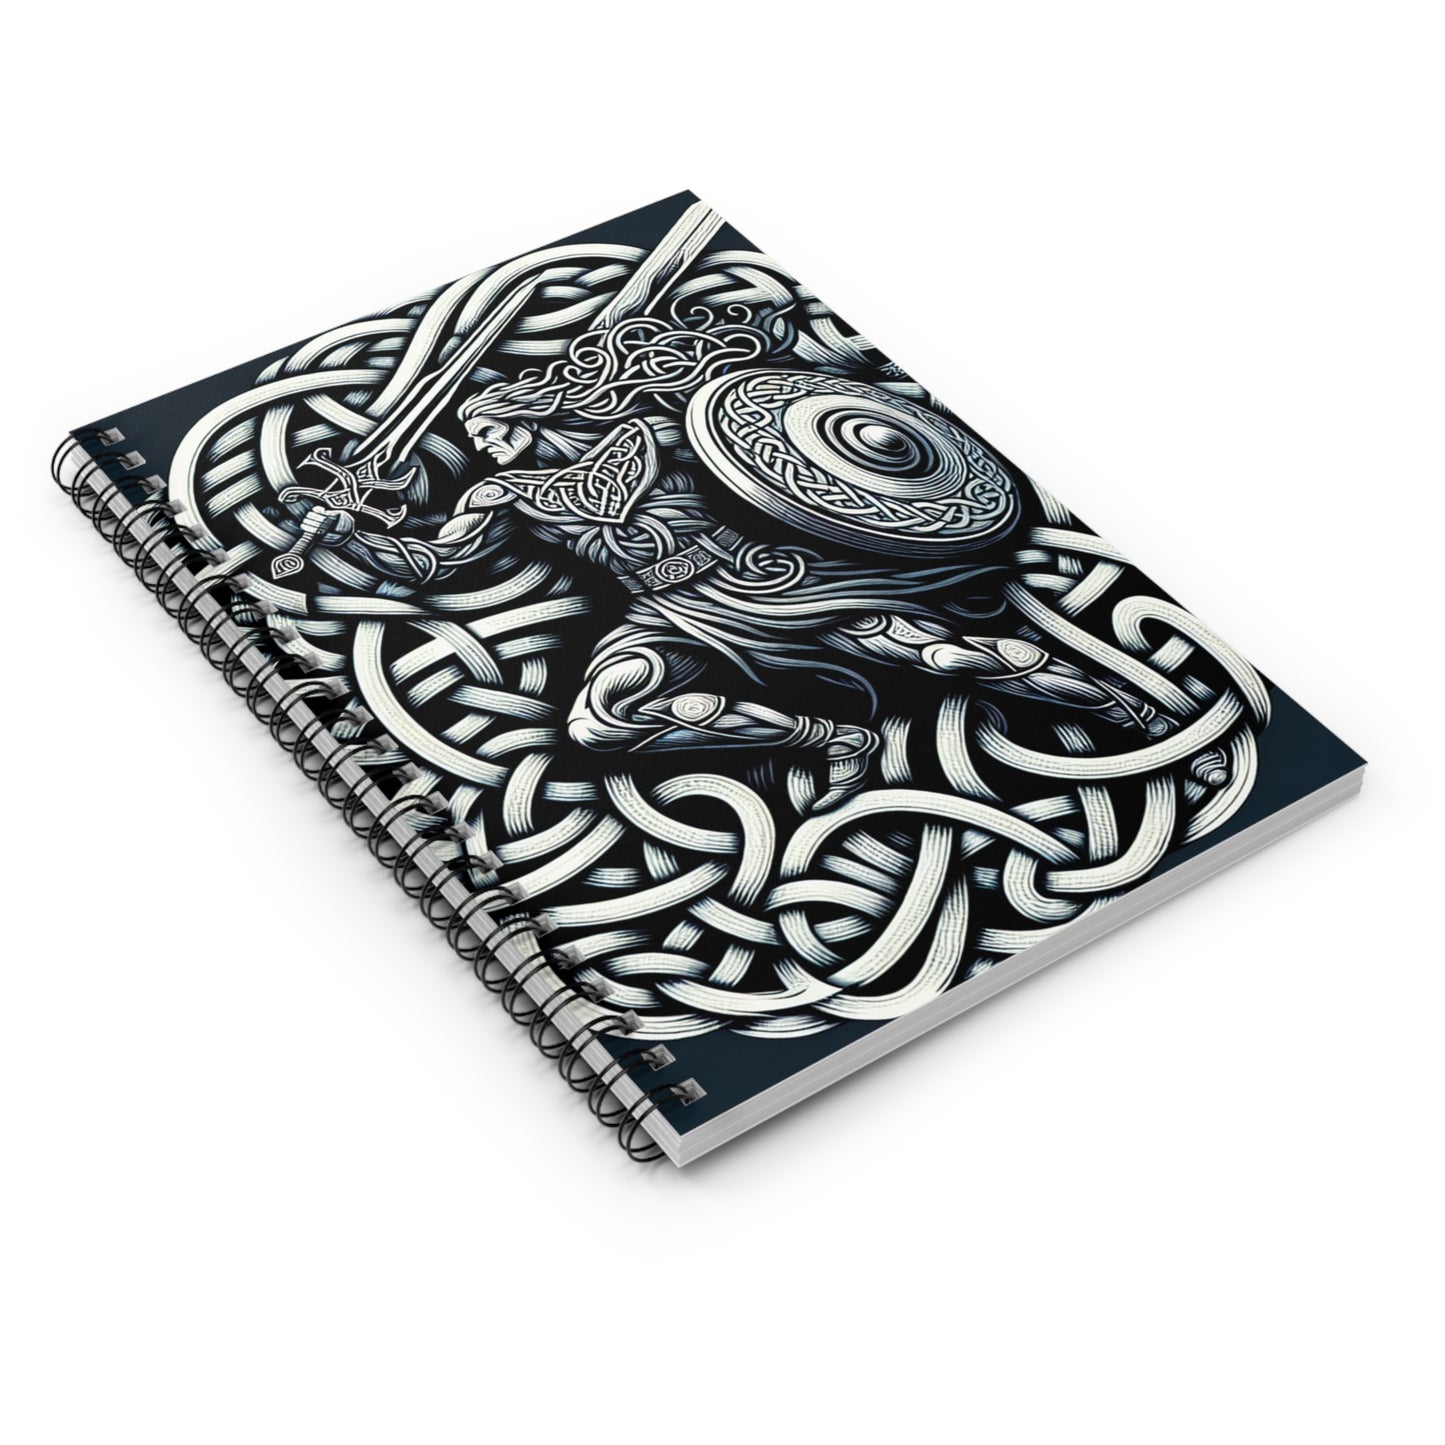 "Celtic Knight: Sword & Shield in Ancient Knots" - The Alien Spiral Notebook (Ruled Line) Celtic Art Style